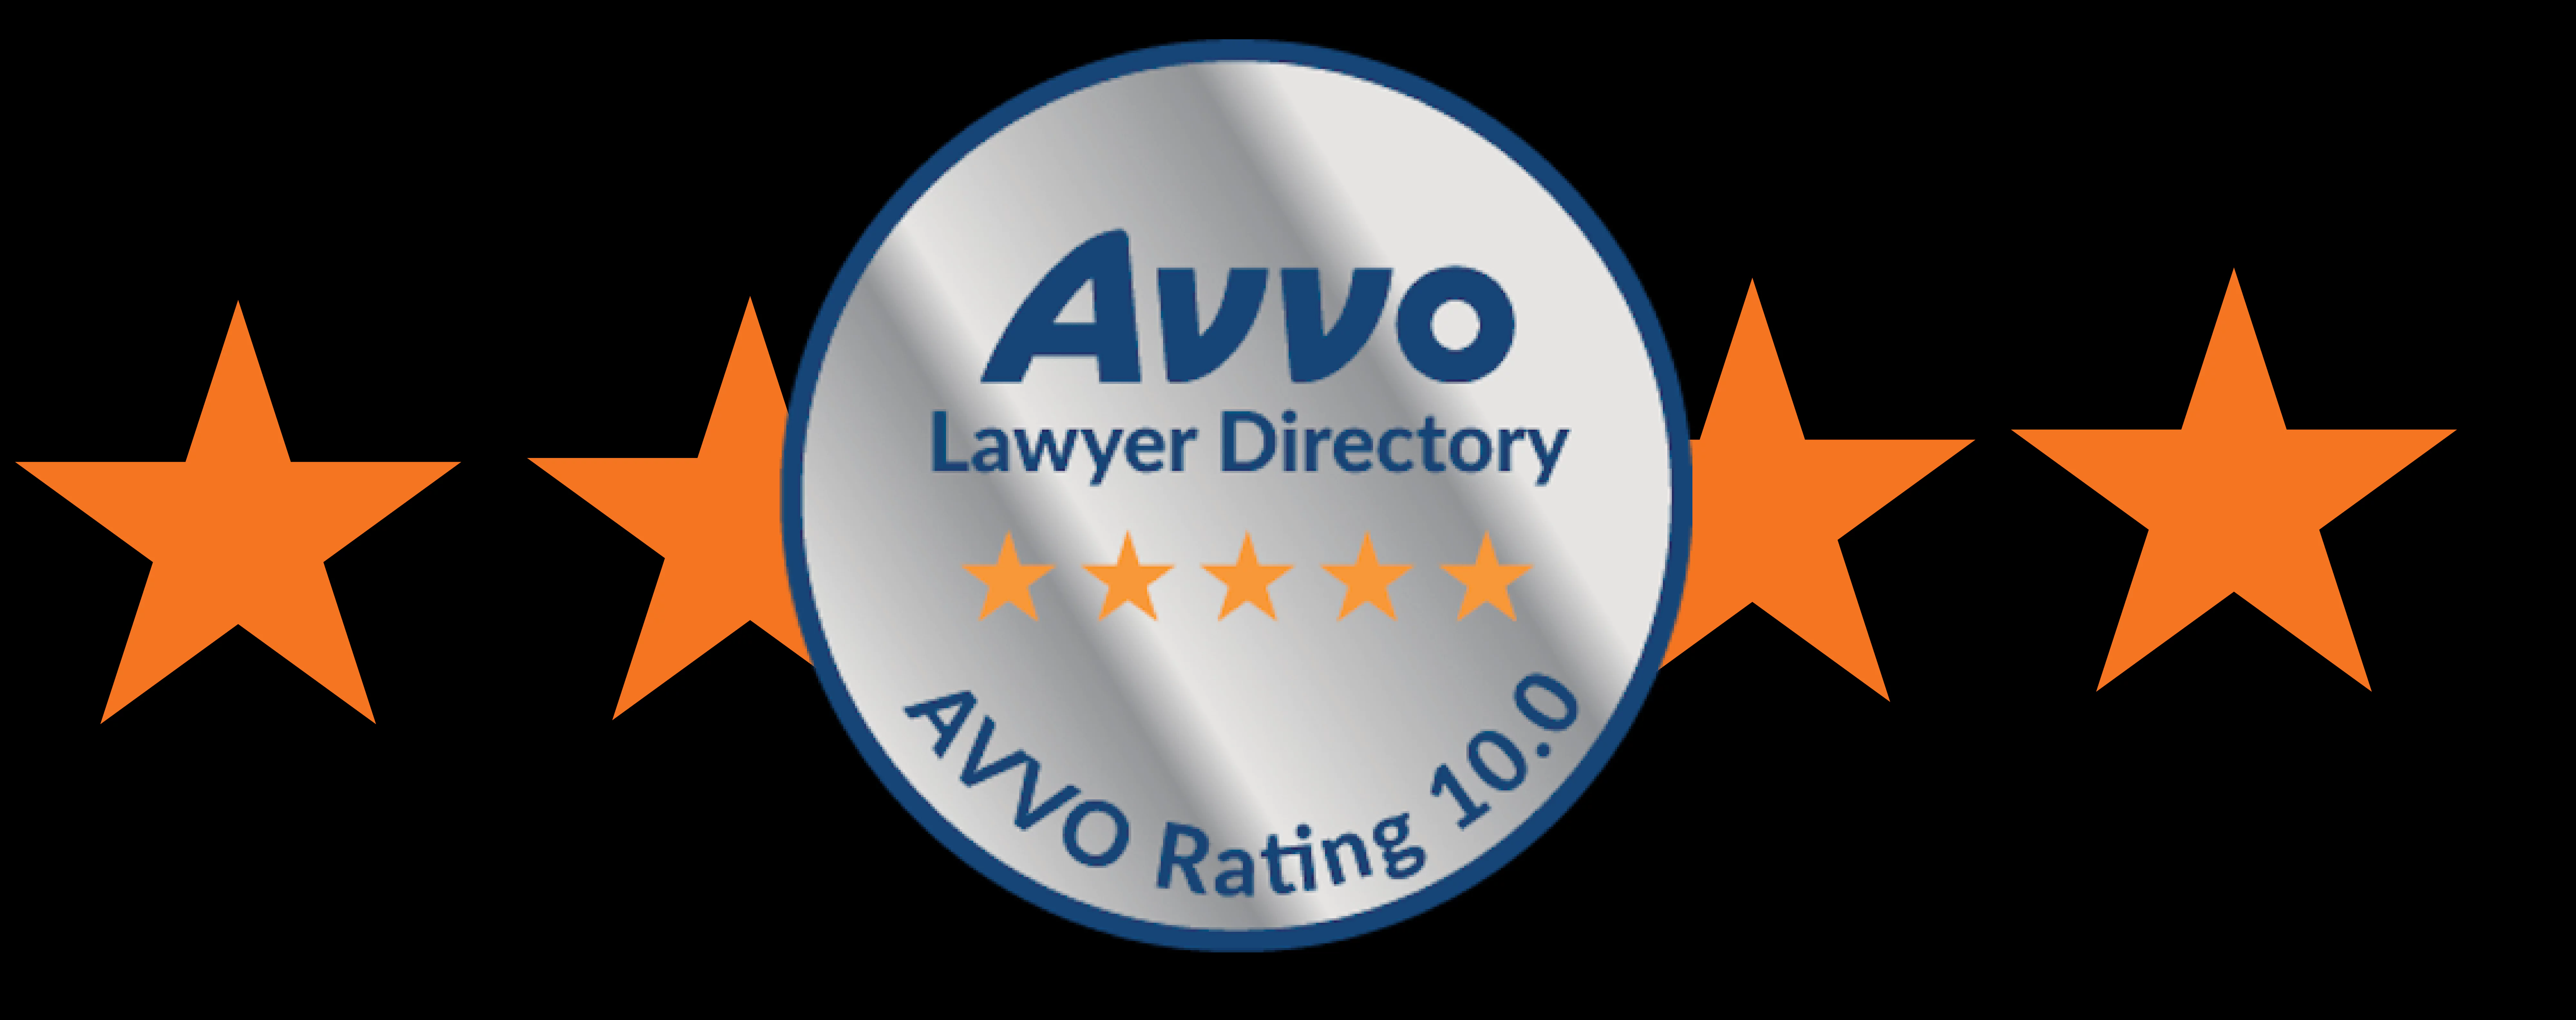 avvo logo with stars in the background